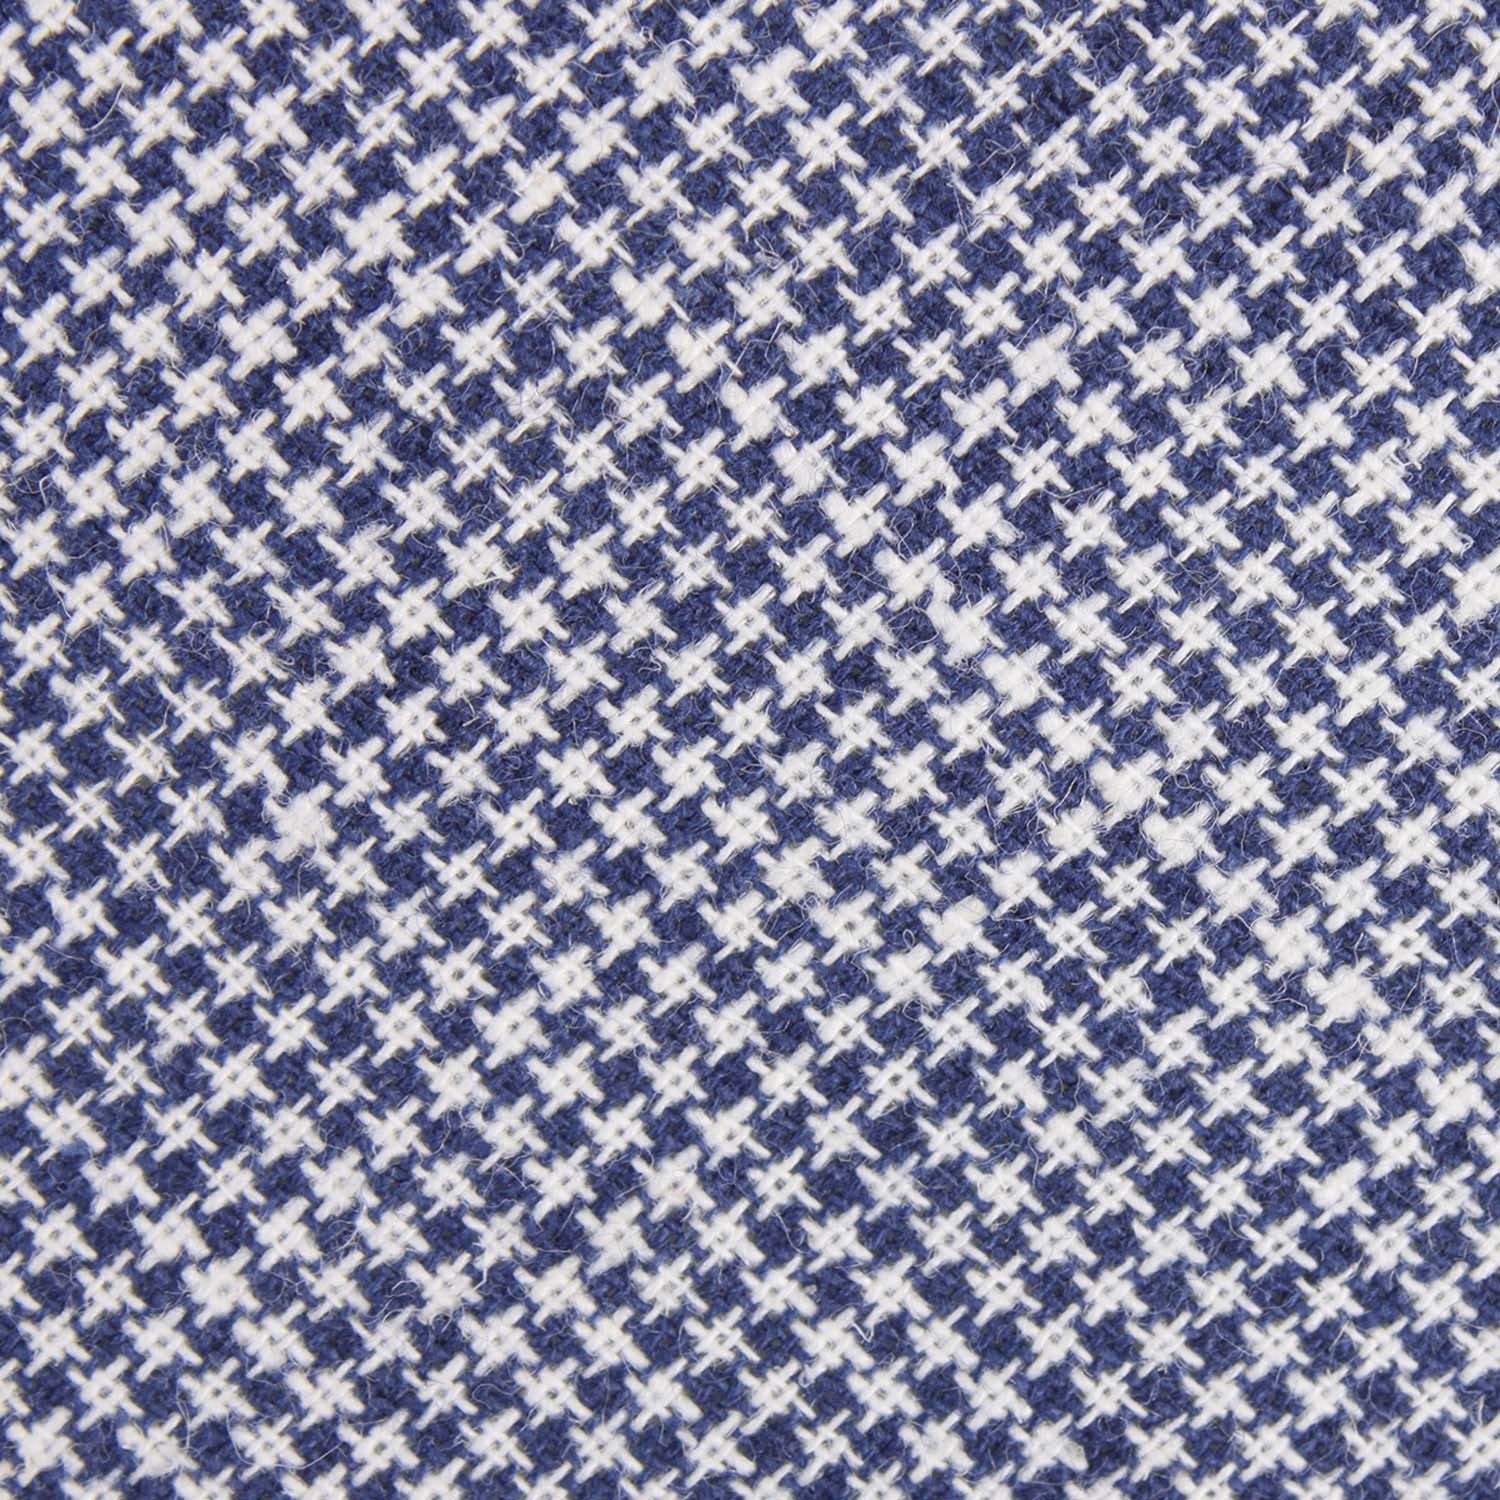 Navy Blue Houndstooth Linen Fabric Skinny Tie L181